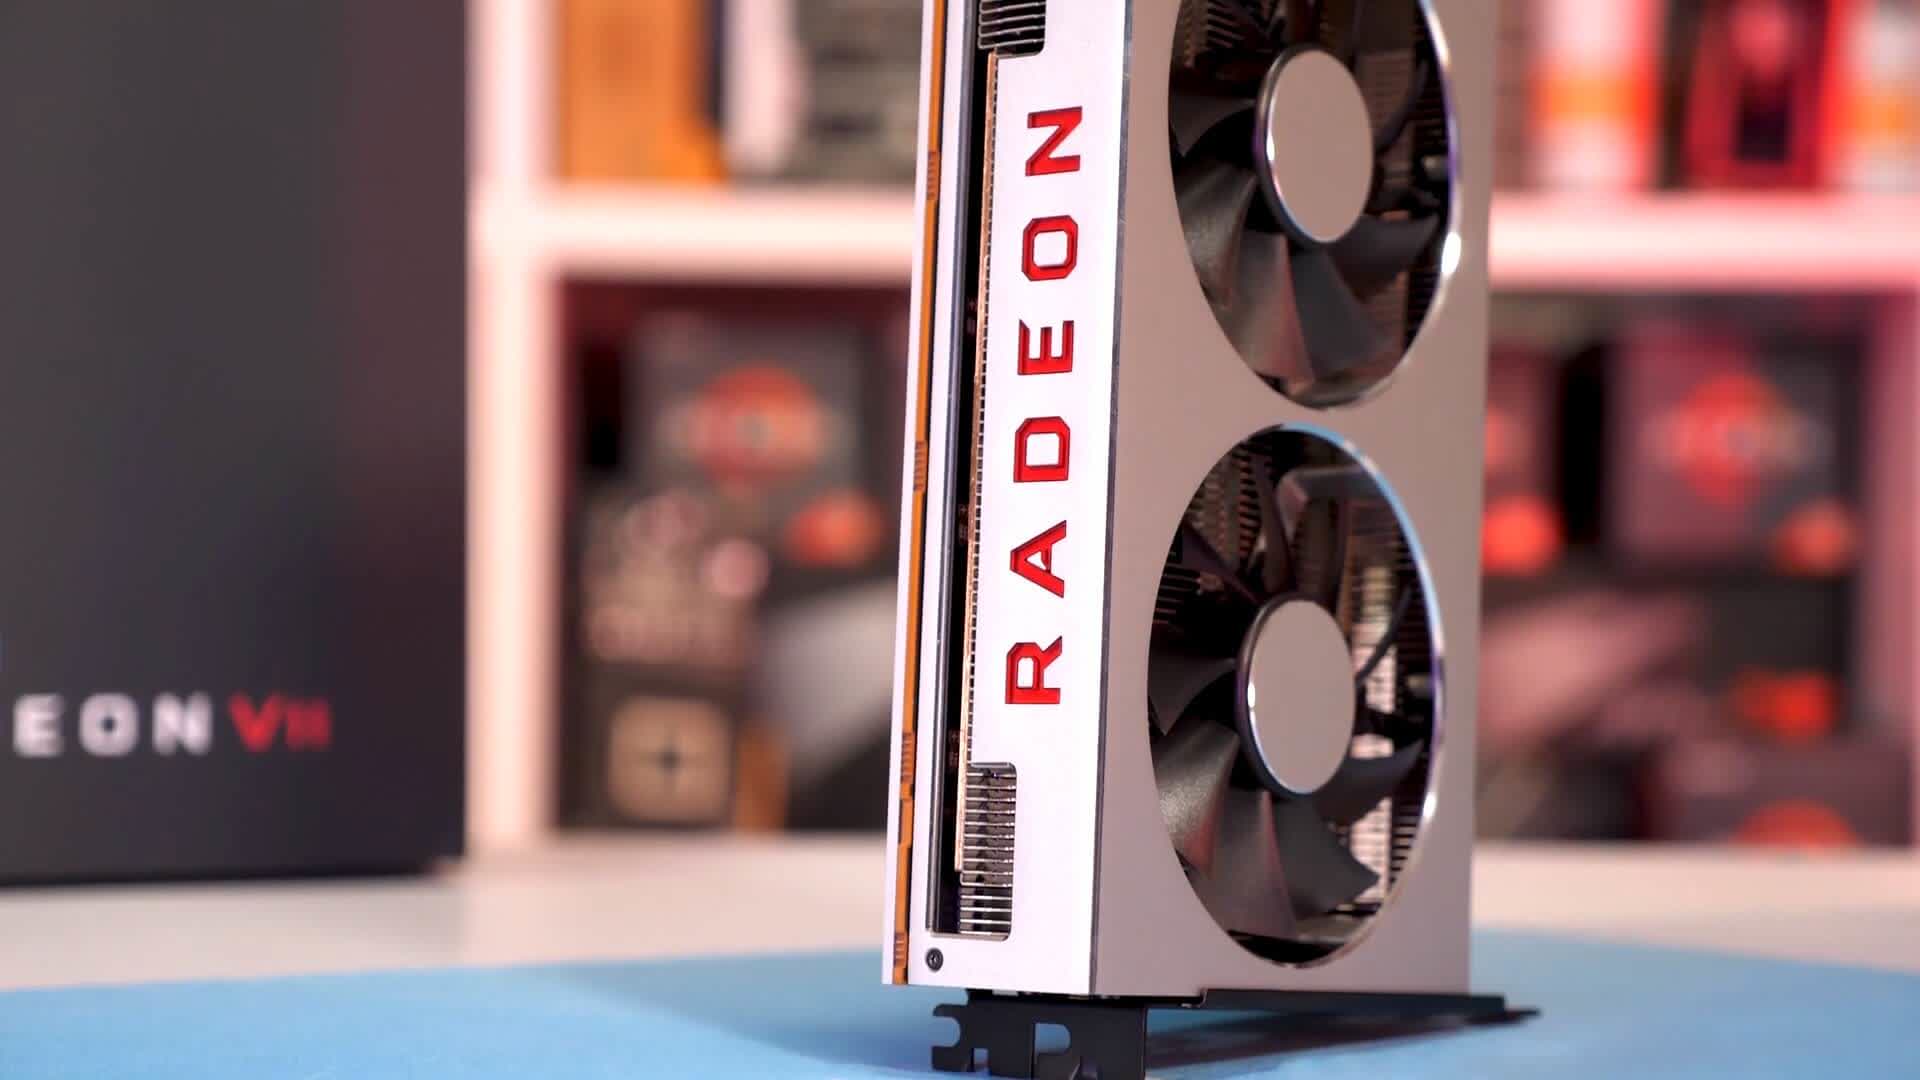 AMD could launch a 'mid-range' RDNA 4 GPU that's faster than the Radeon RX 7900 XT